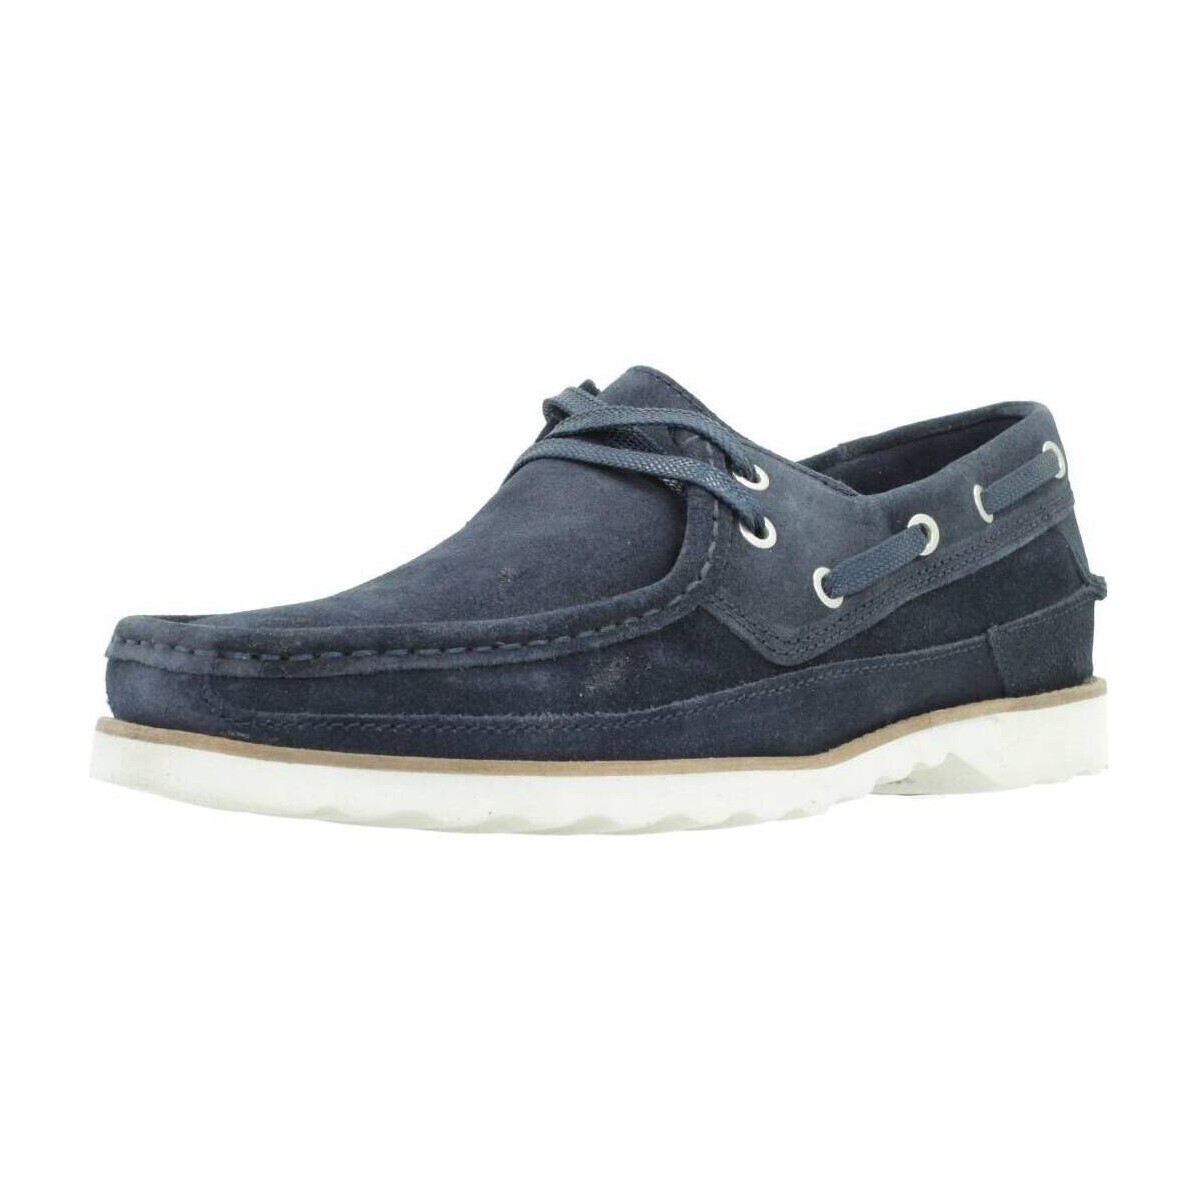 Boat shoes Clarks DURLEIGH SAIL